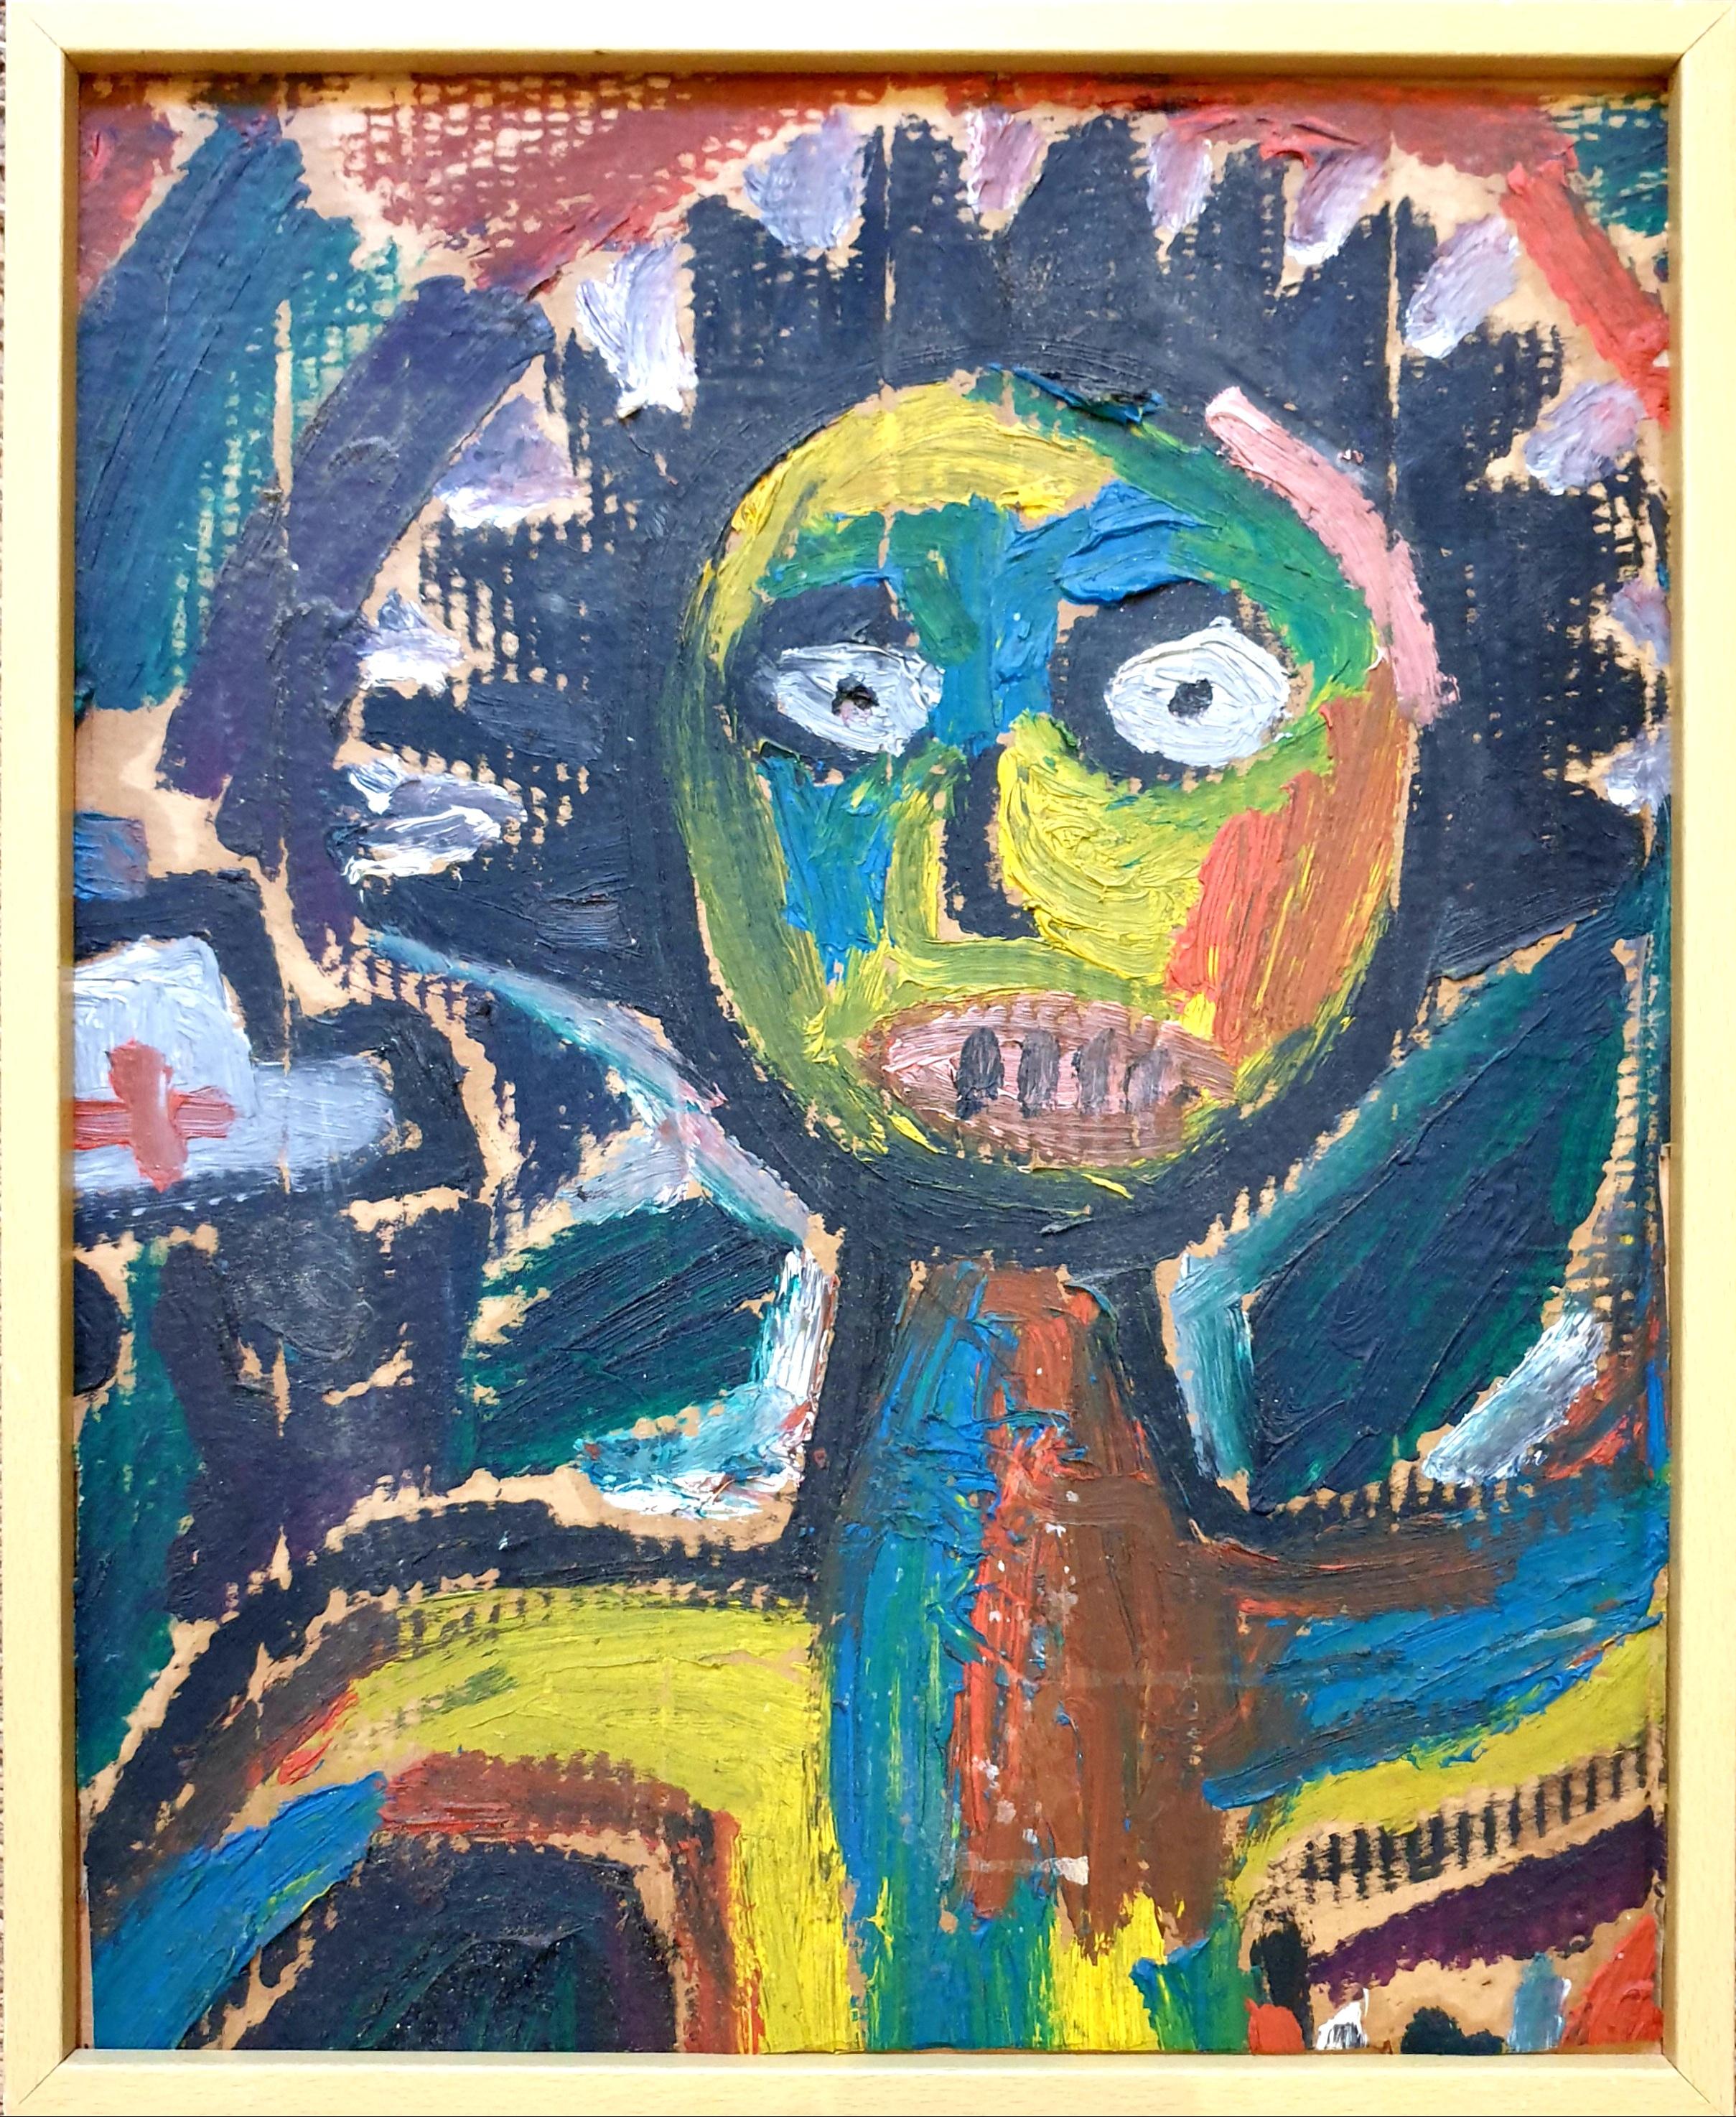 Jean-Michel Basquiat Figurative Painting - Neo-Expressionist Hommage to Basquiat. Acrylic on Cardboard.